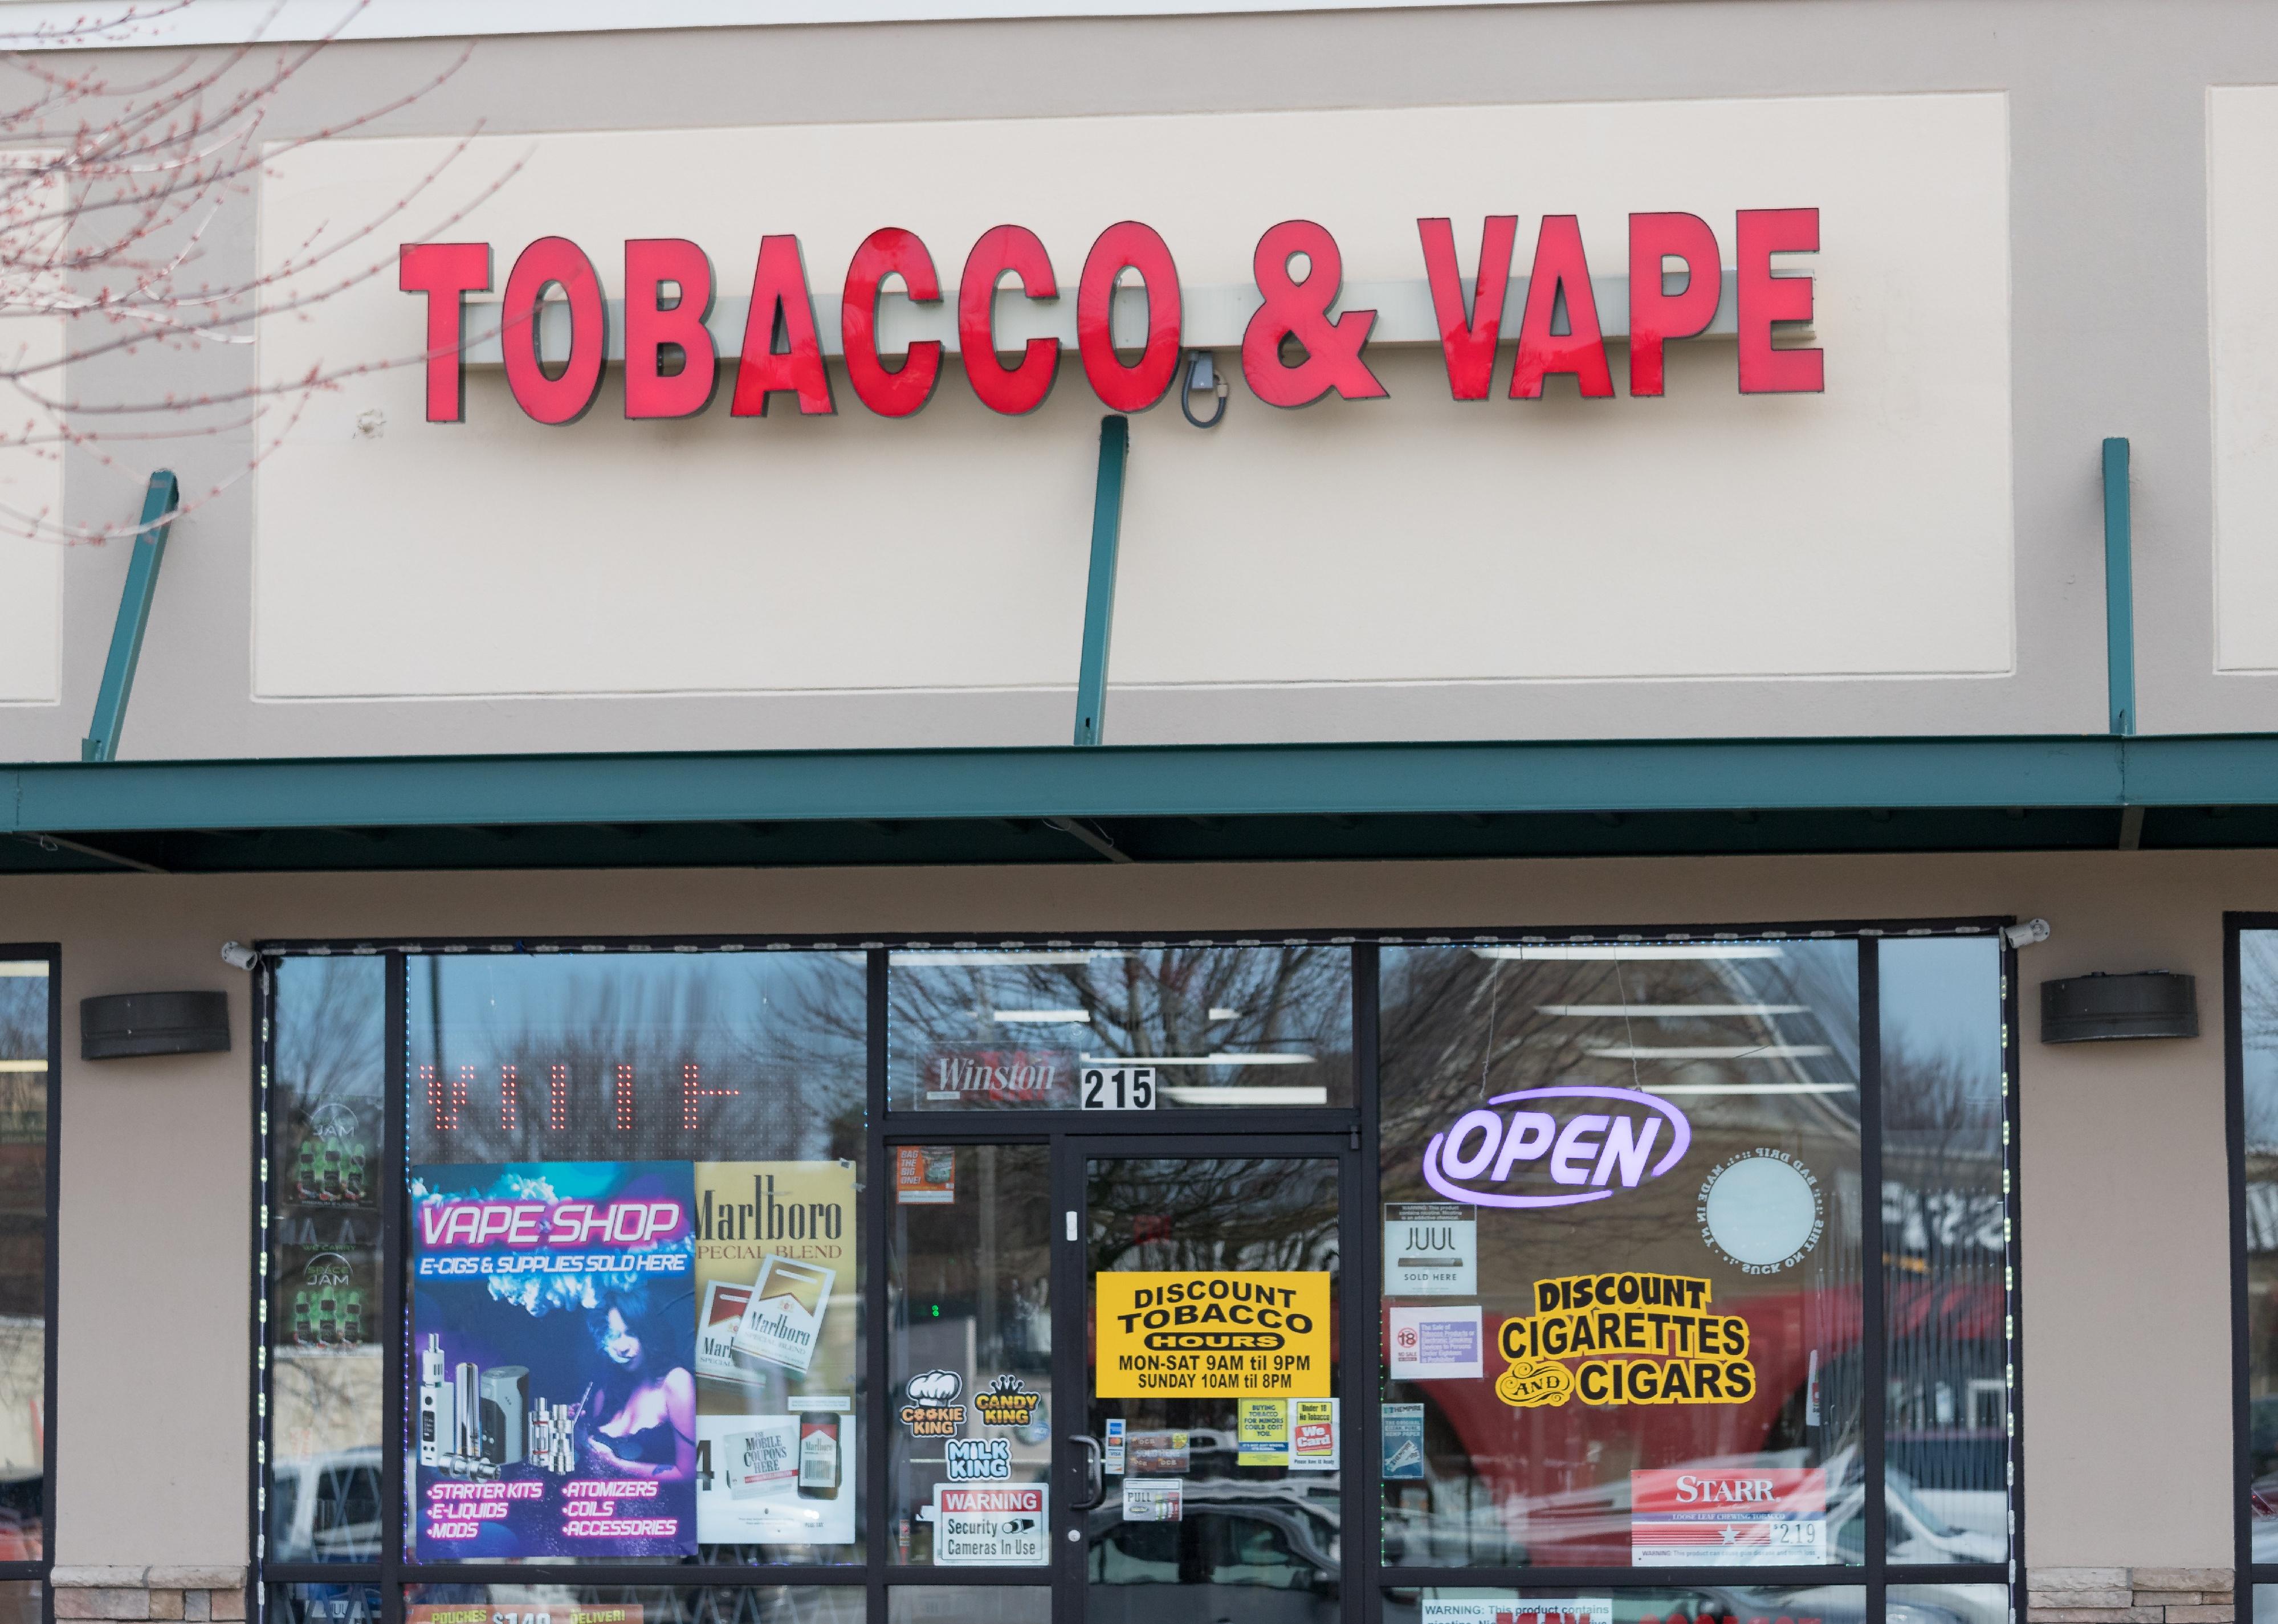 Tobacco & Vape store front in the daytime